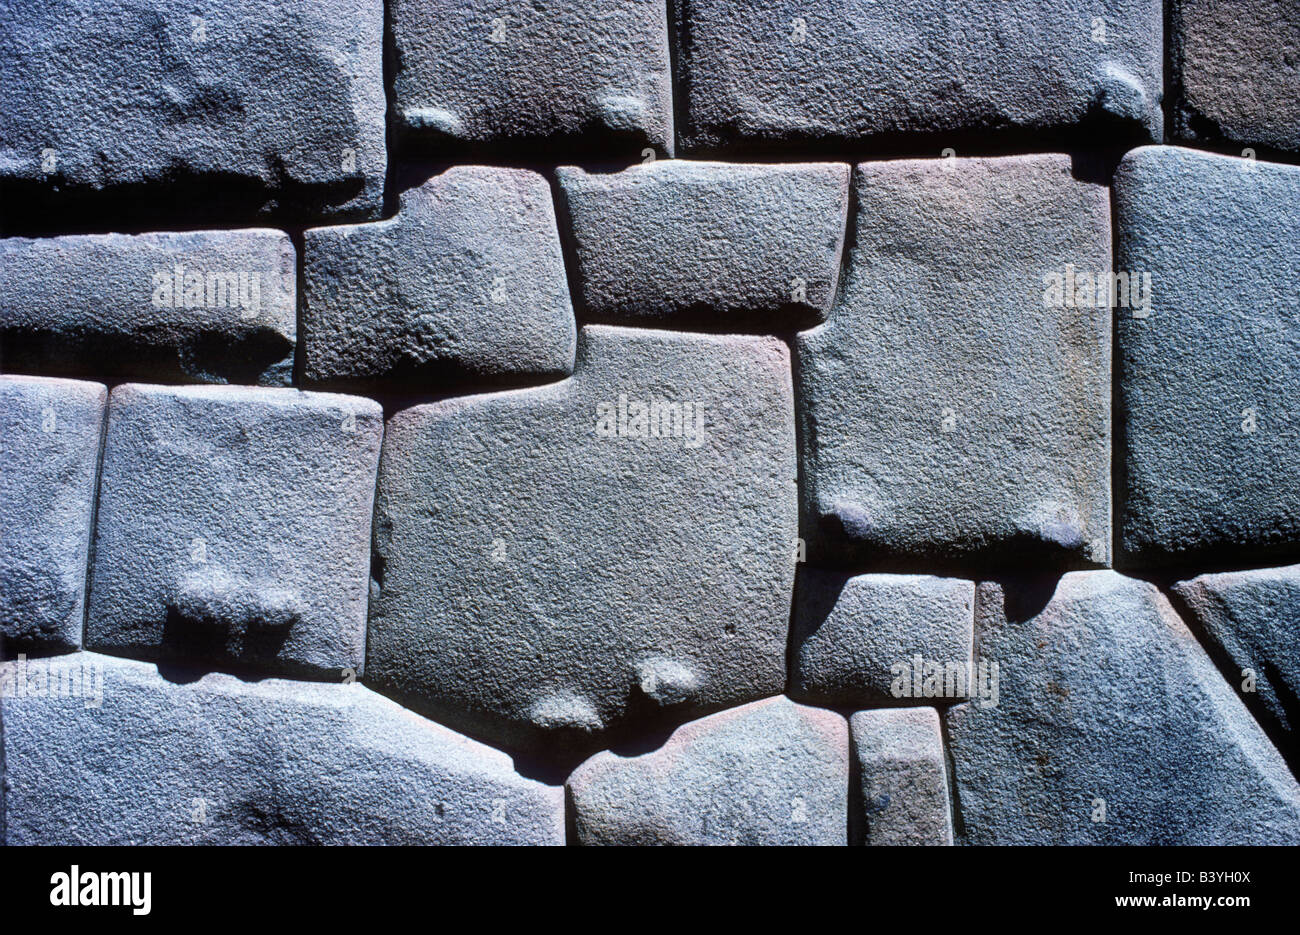 Peru, Cuzco. Hatun Rumiyoc (great stone) street in Cuzco - one of the surviving walls of the Inca Roca's Palace. Stock Photo